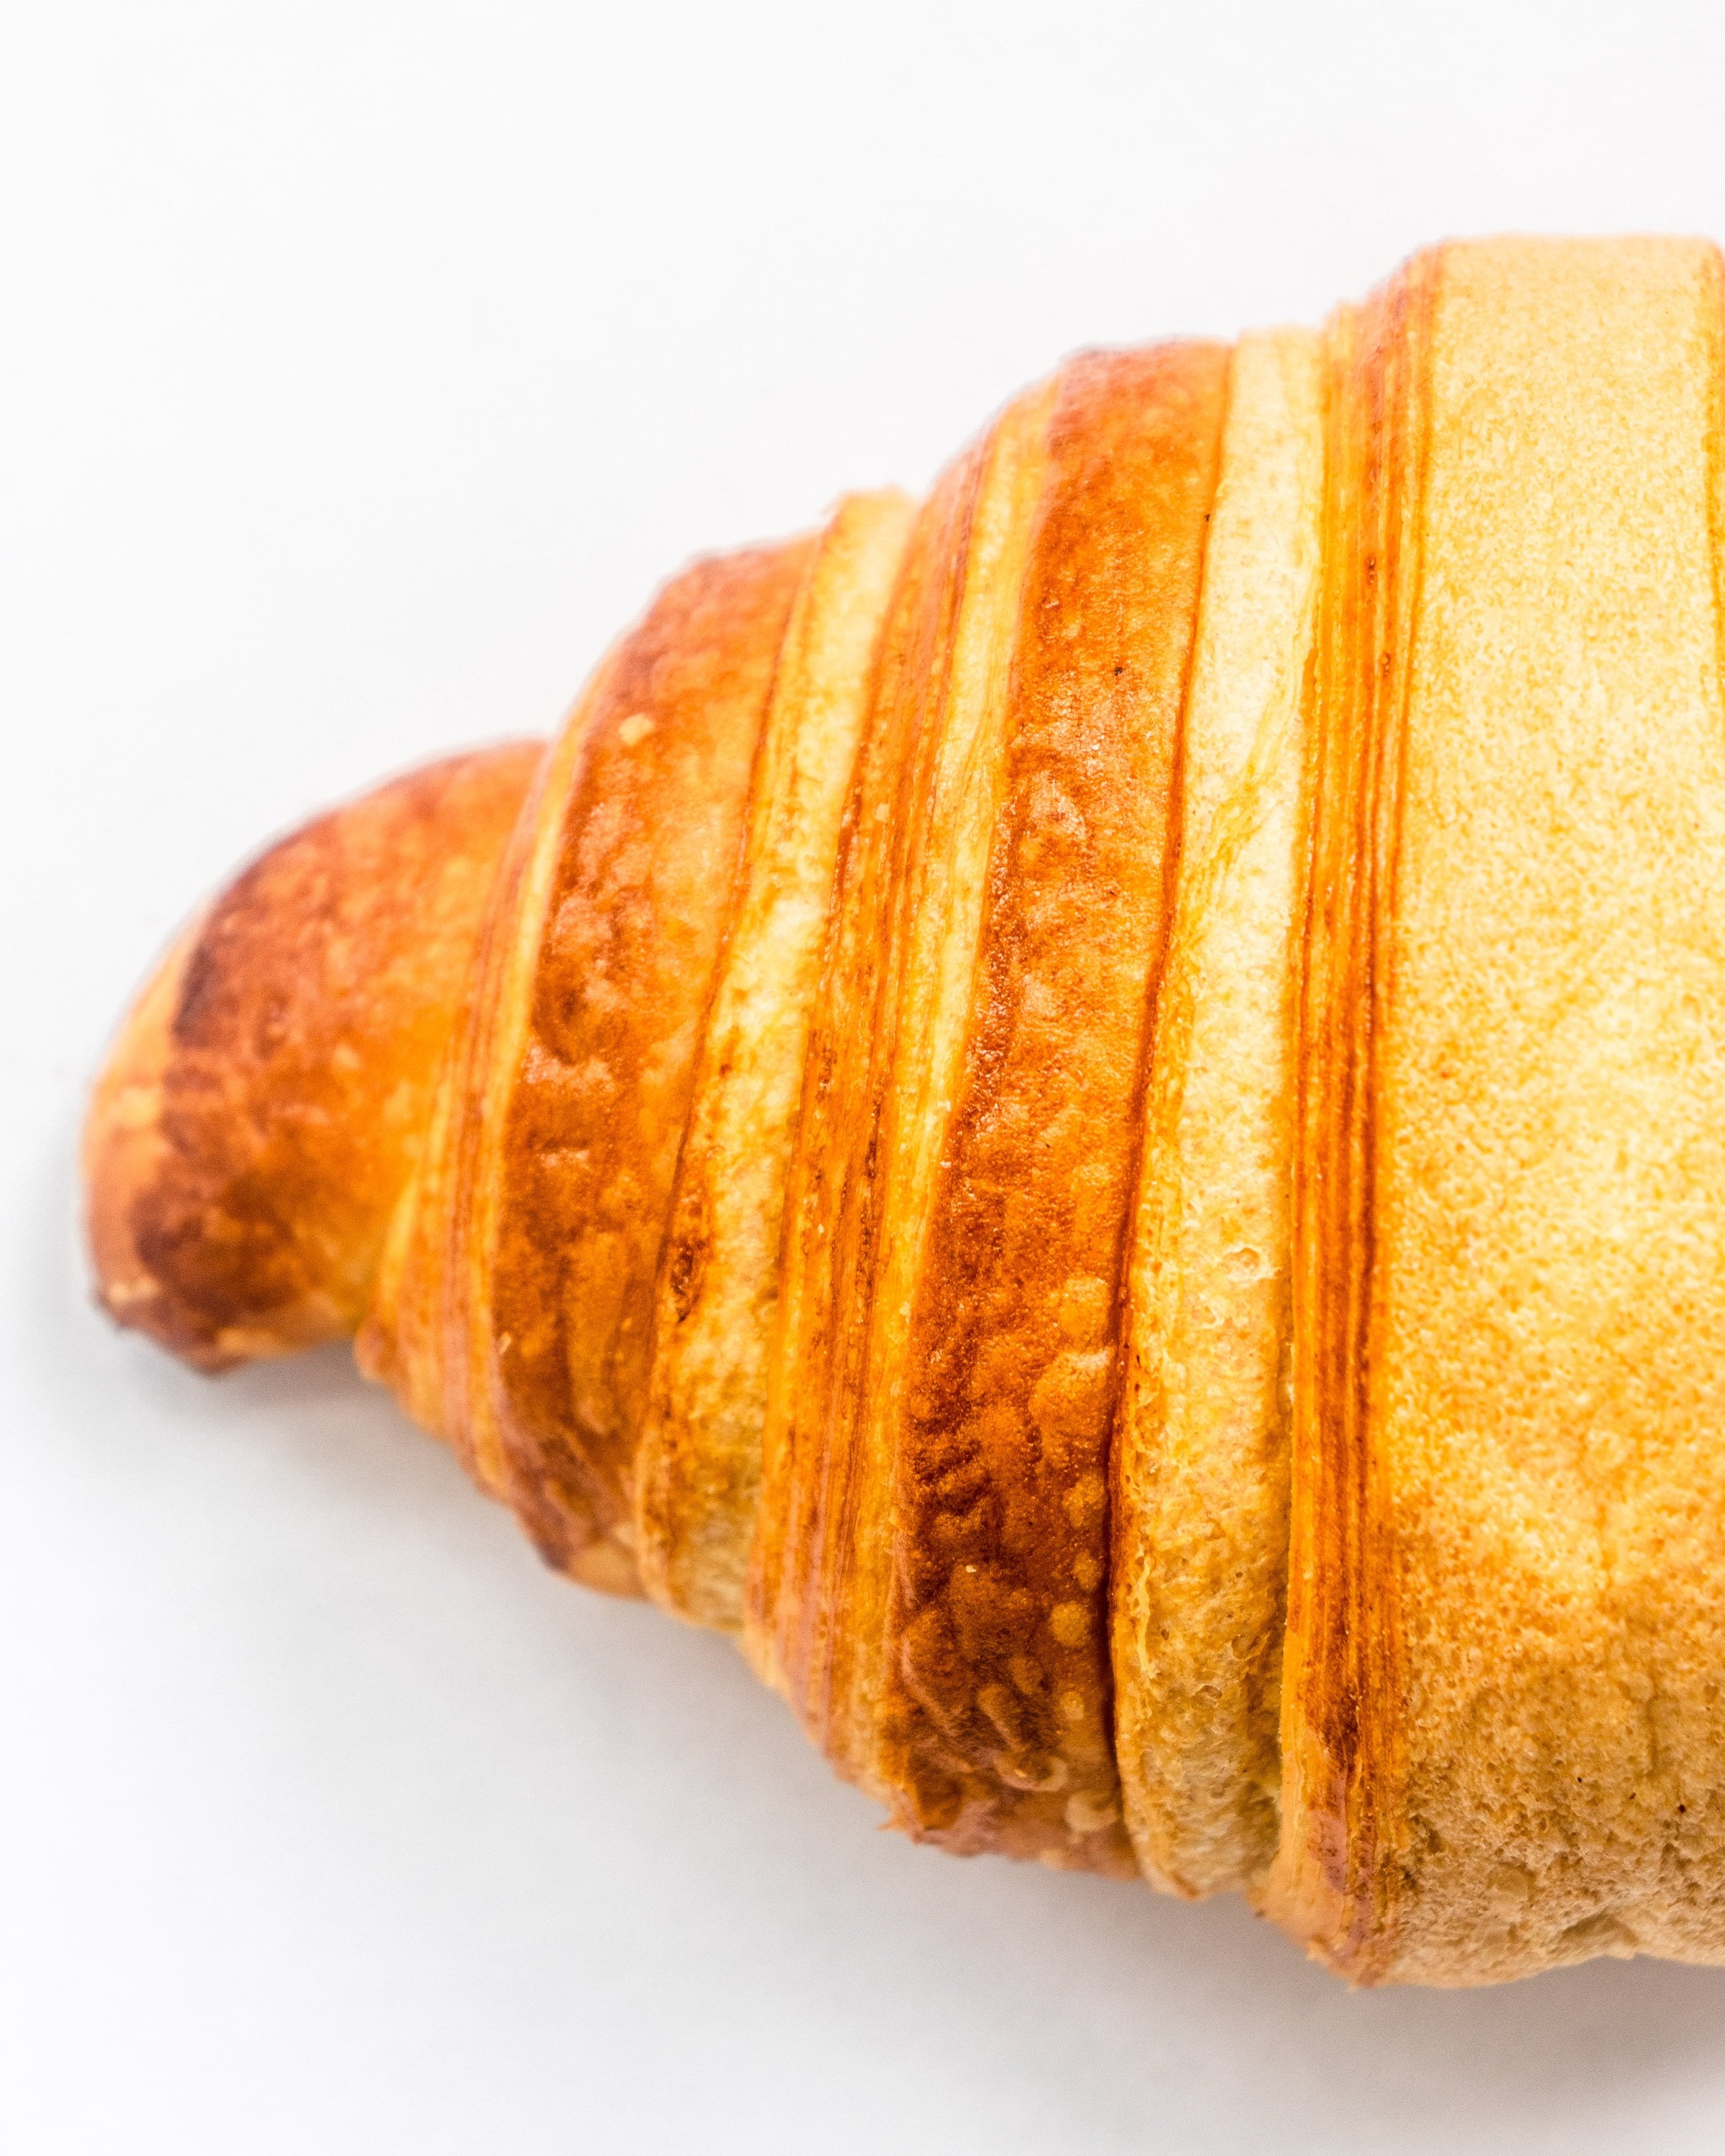 The most famous croissant in ibiza